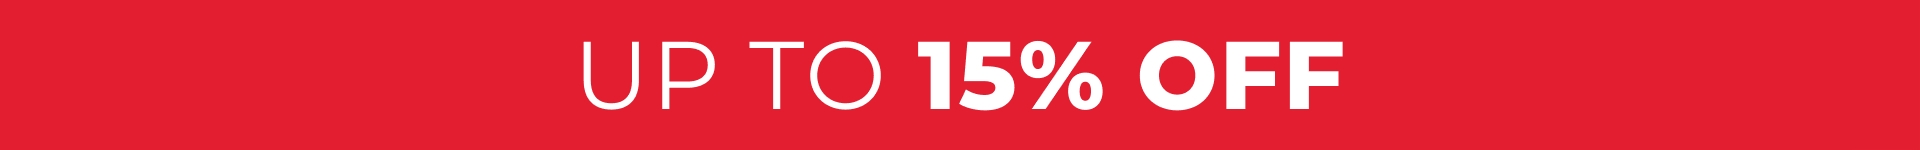 Up to 15% OFF